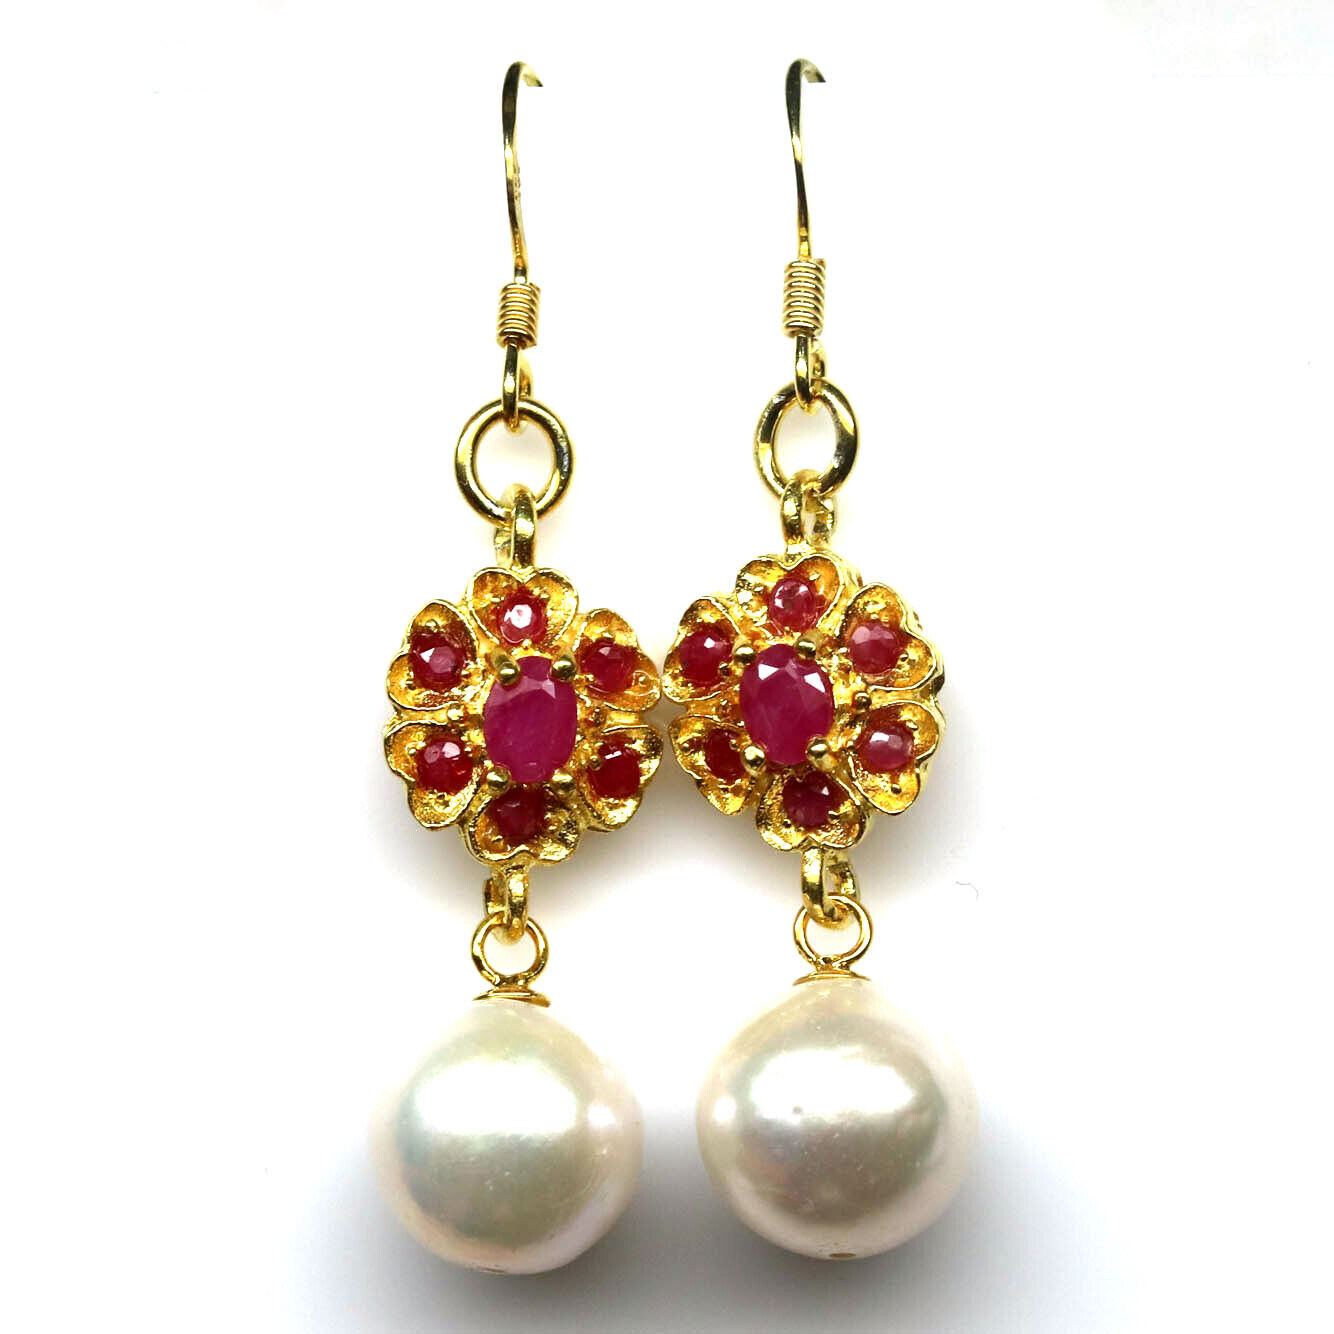 A pair of gold on 925 silver drop earrings set with rubies and pearls, L. 4.4cm.